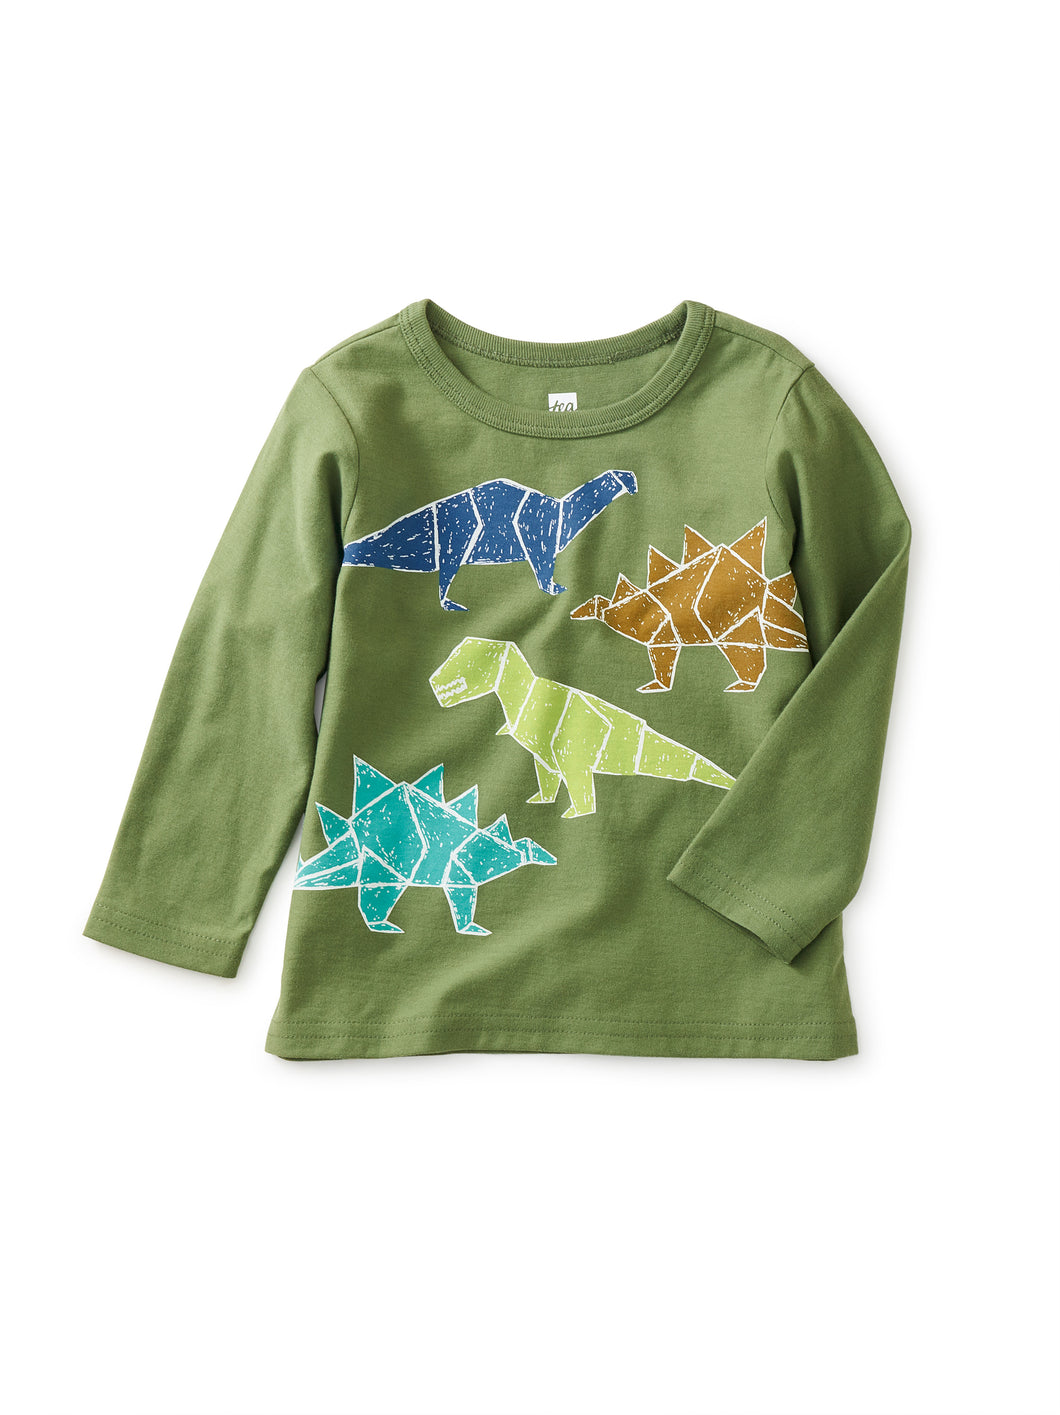 Tea Collection Baby Long Sleeve Graphic Tee - Dino Friends